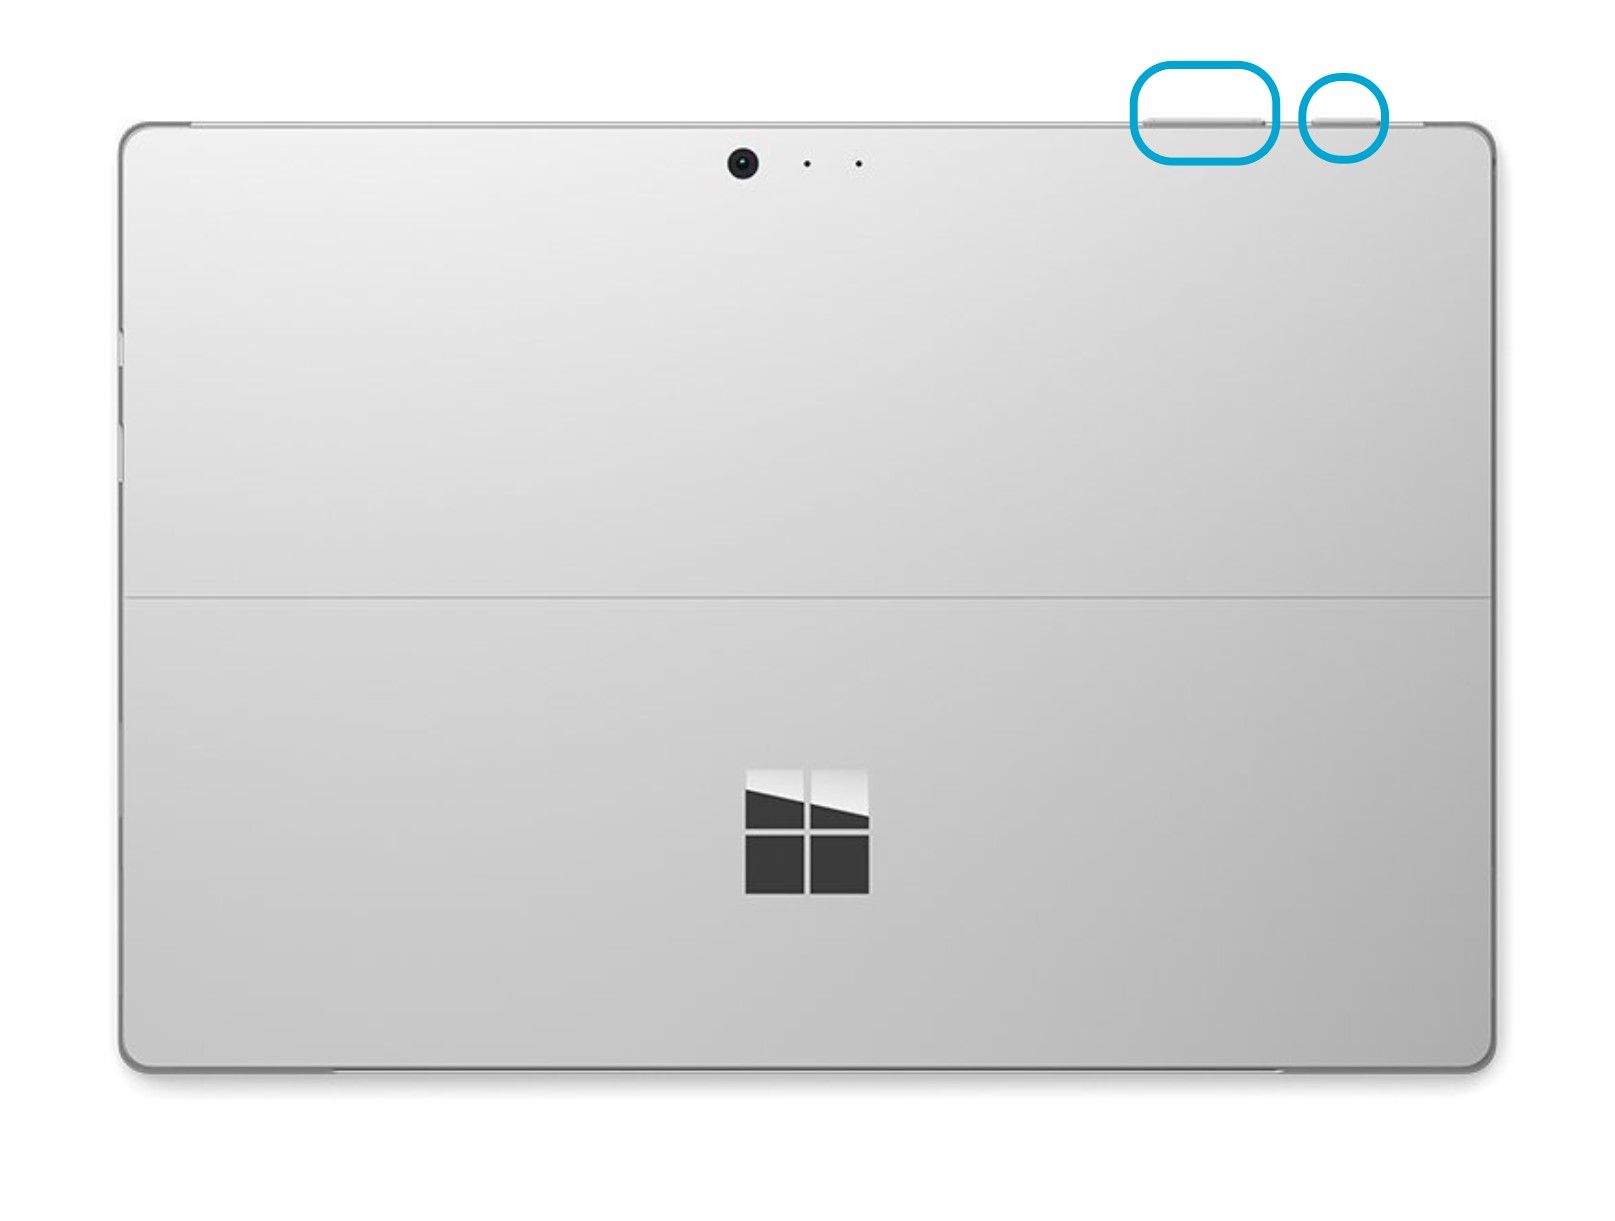 Buttons of the Microsoft Surface Pro circled